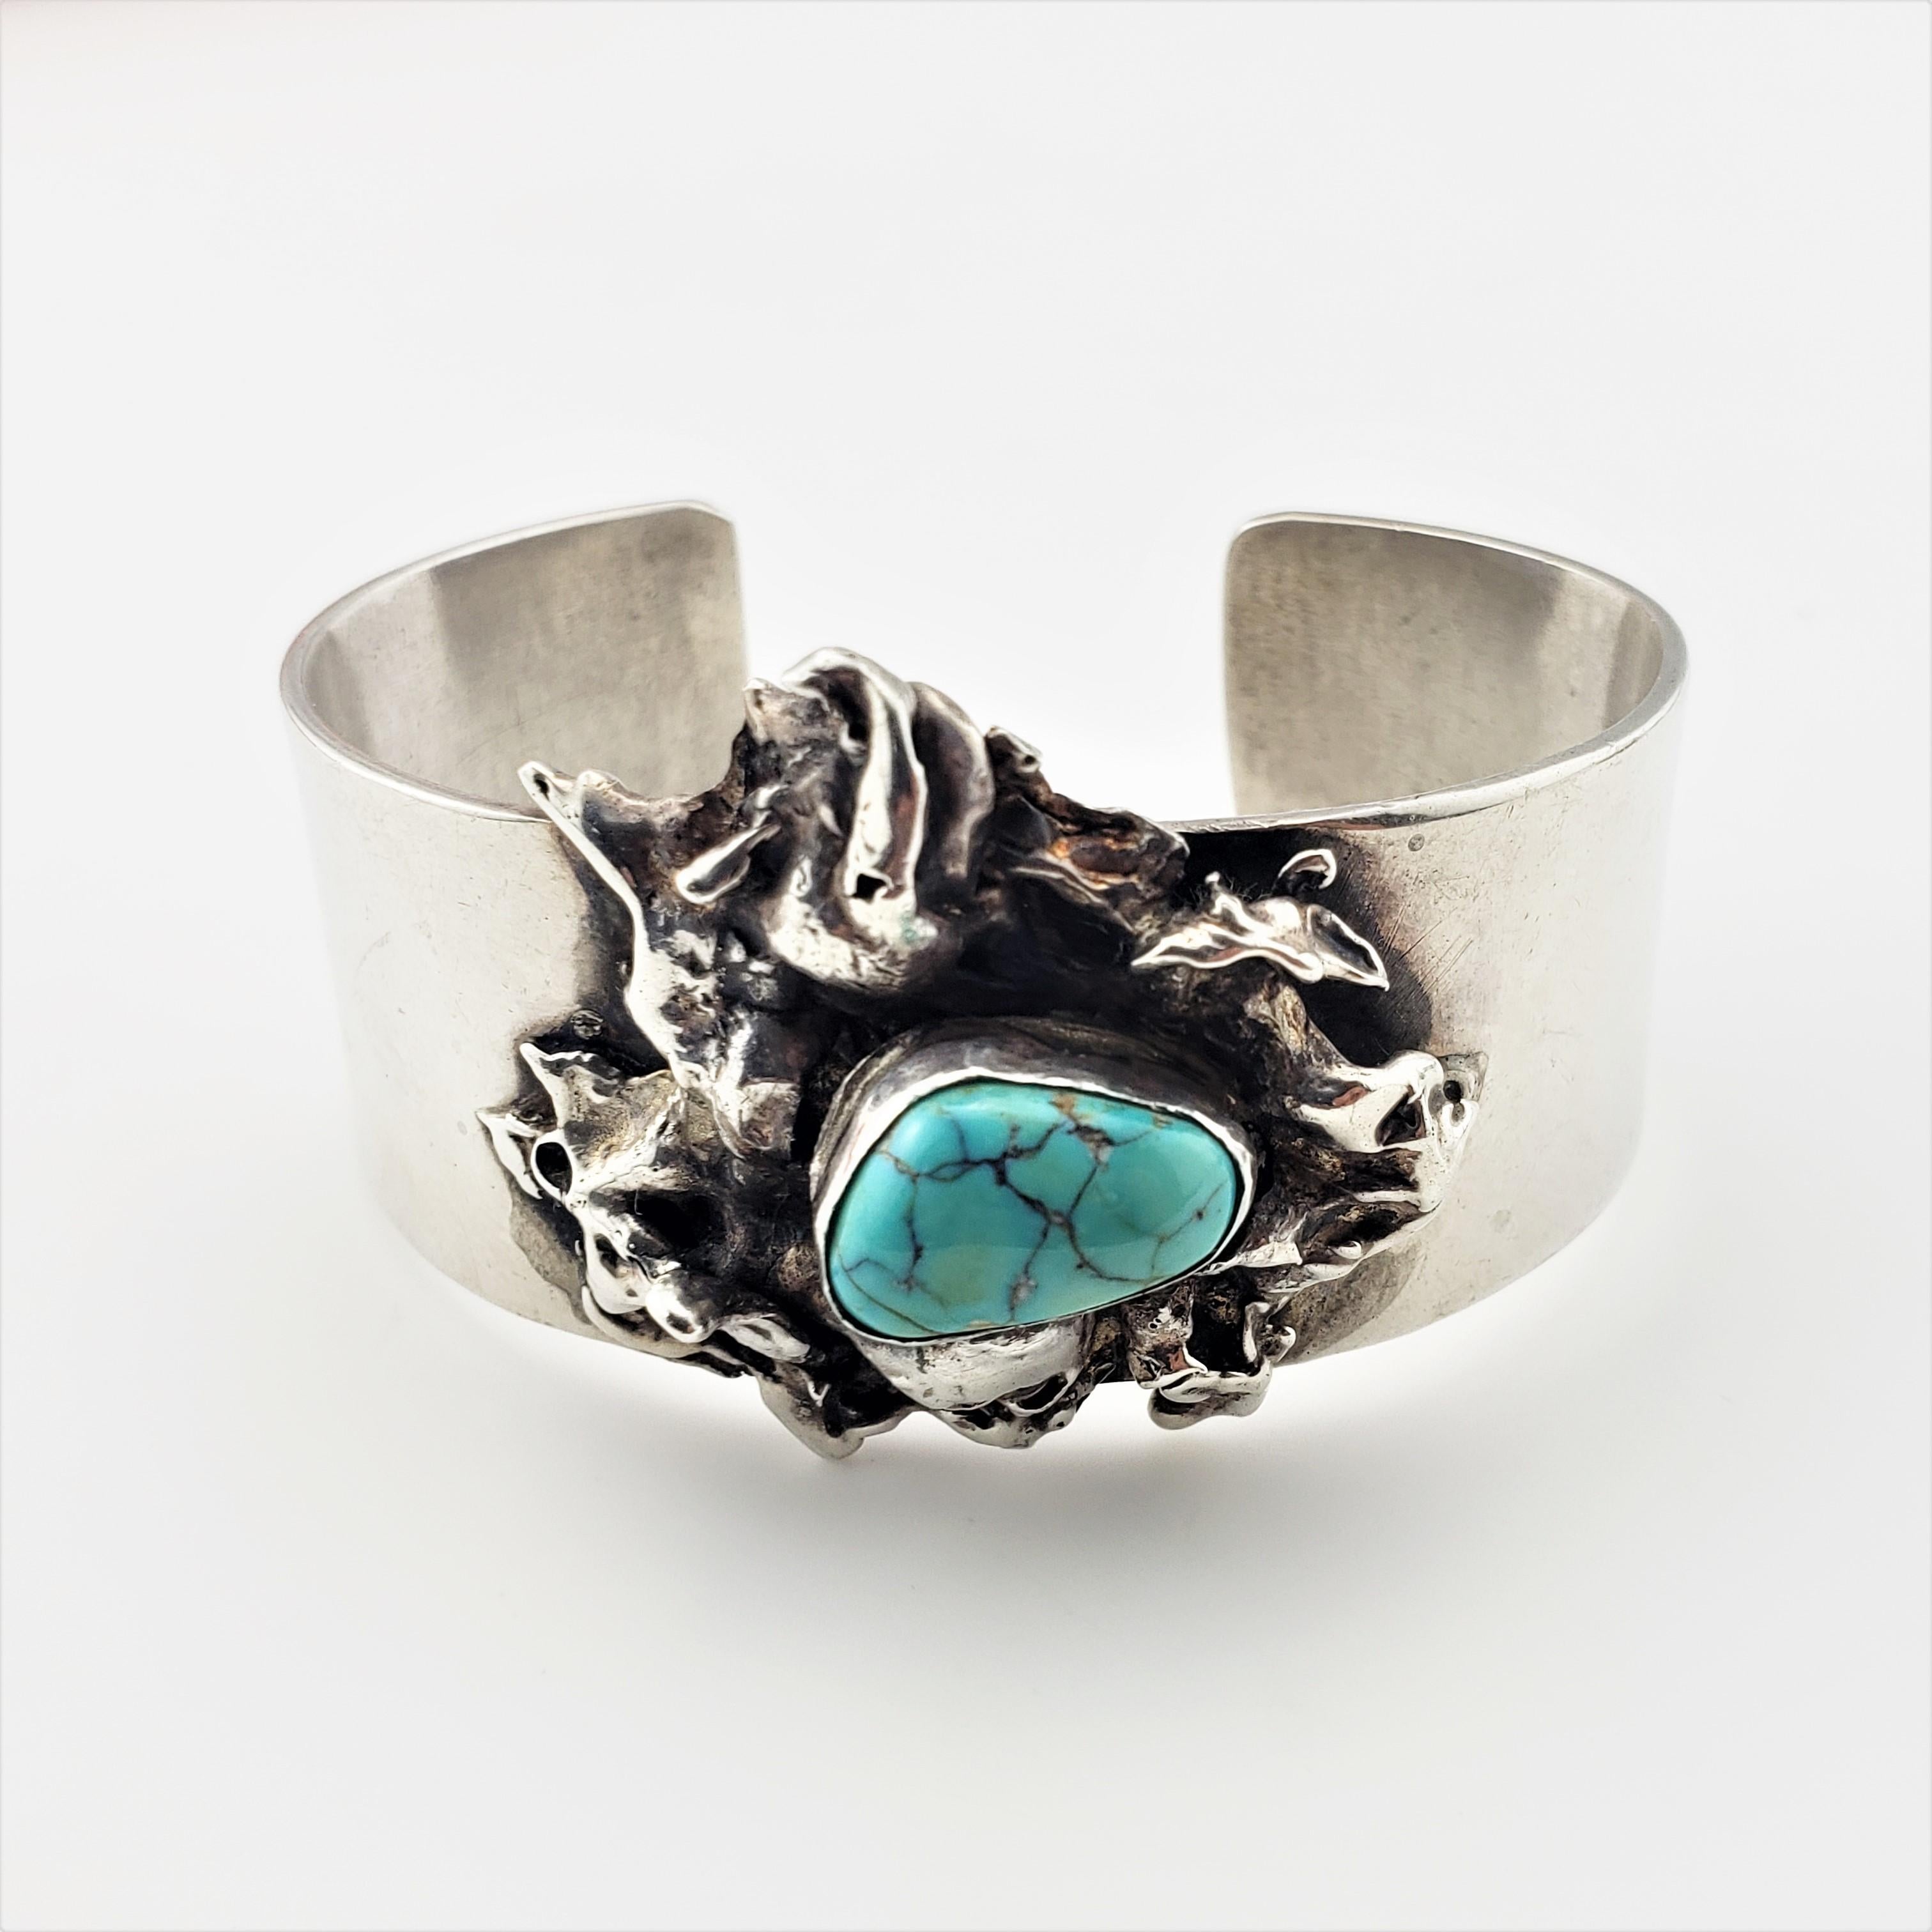 Abstract Dripped Sterling Silver Turquoise Cuff Bracelet-

This lovely cuff bracelet features one turquoise stone set in beautifully crafted sterling silver.

Stone:  14 mm x 9 mm; sits 11 mm high

Bracelet Measurements: 5  1/16 inches end to